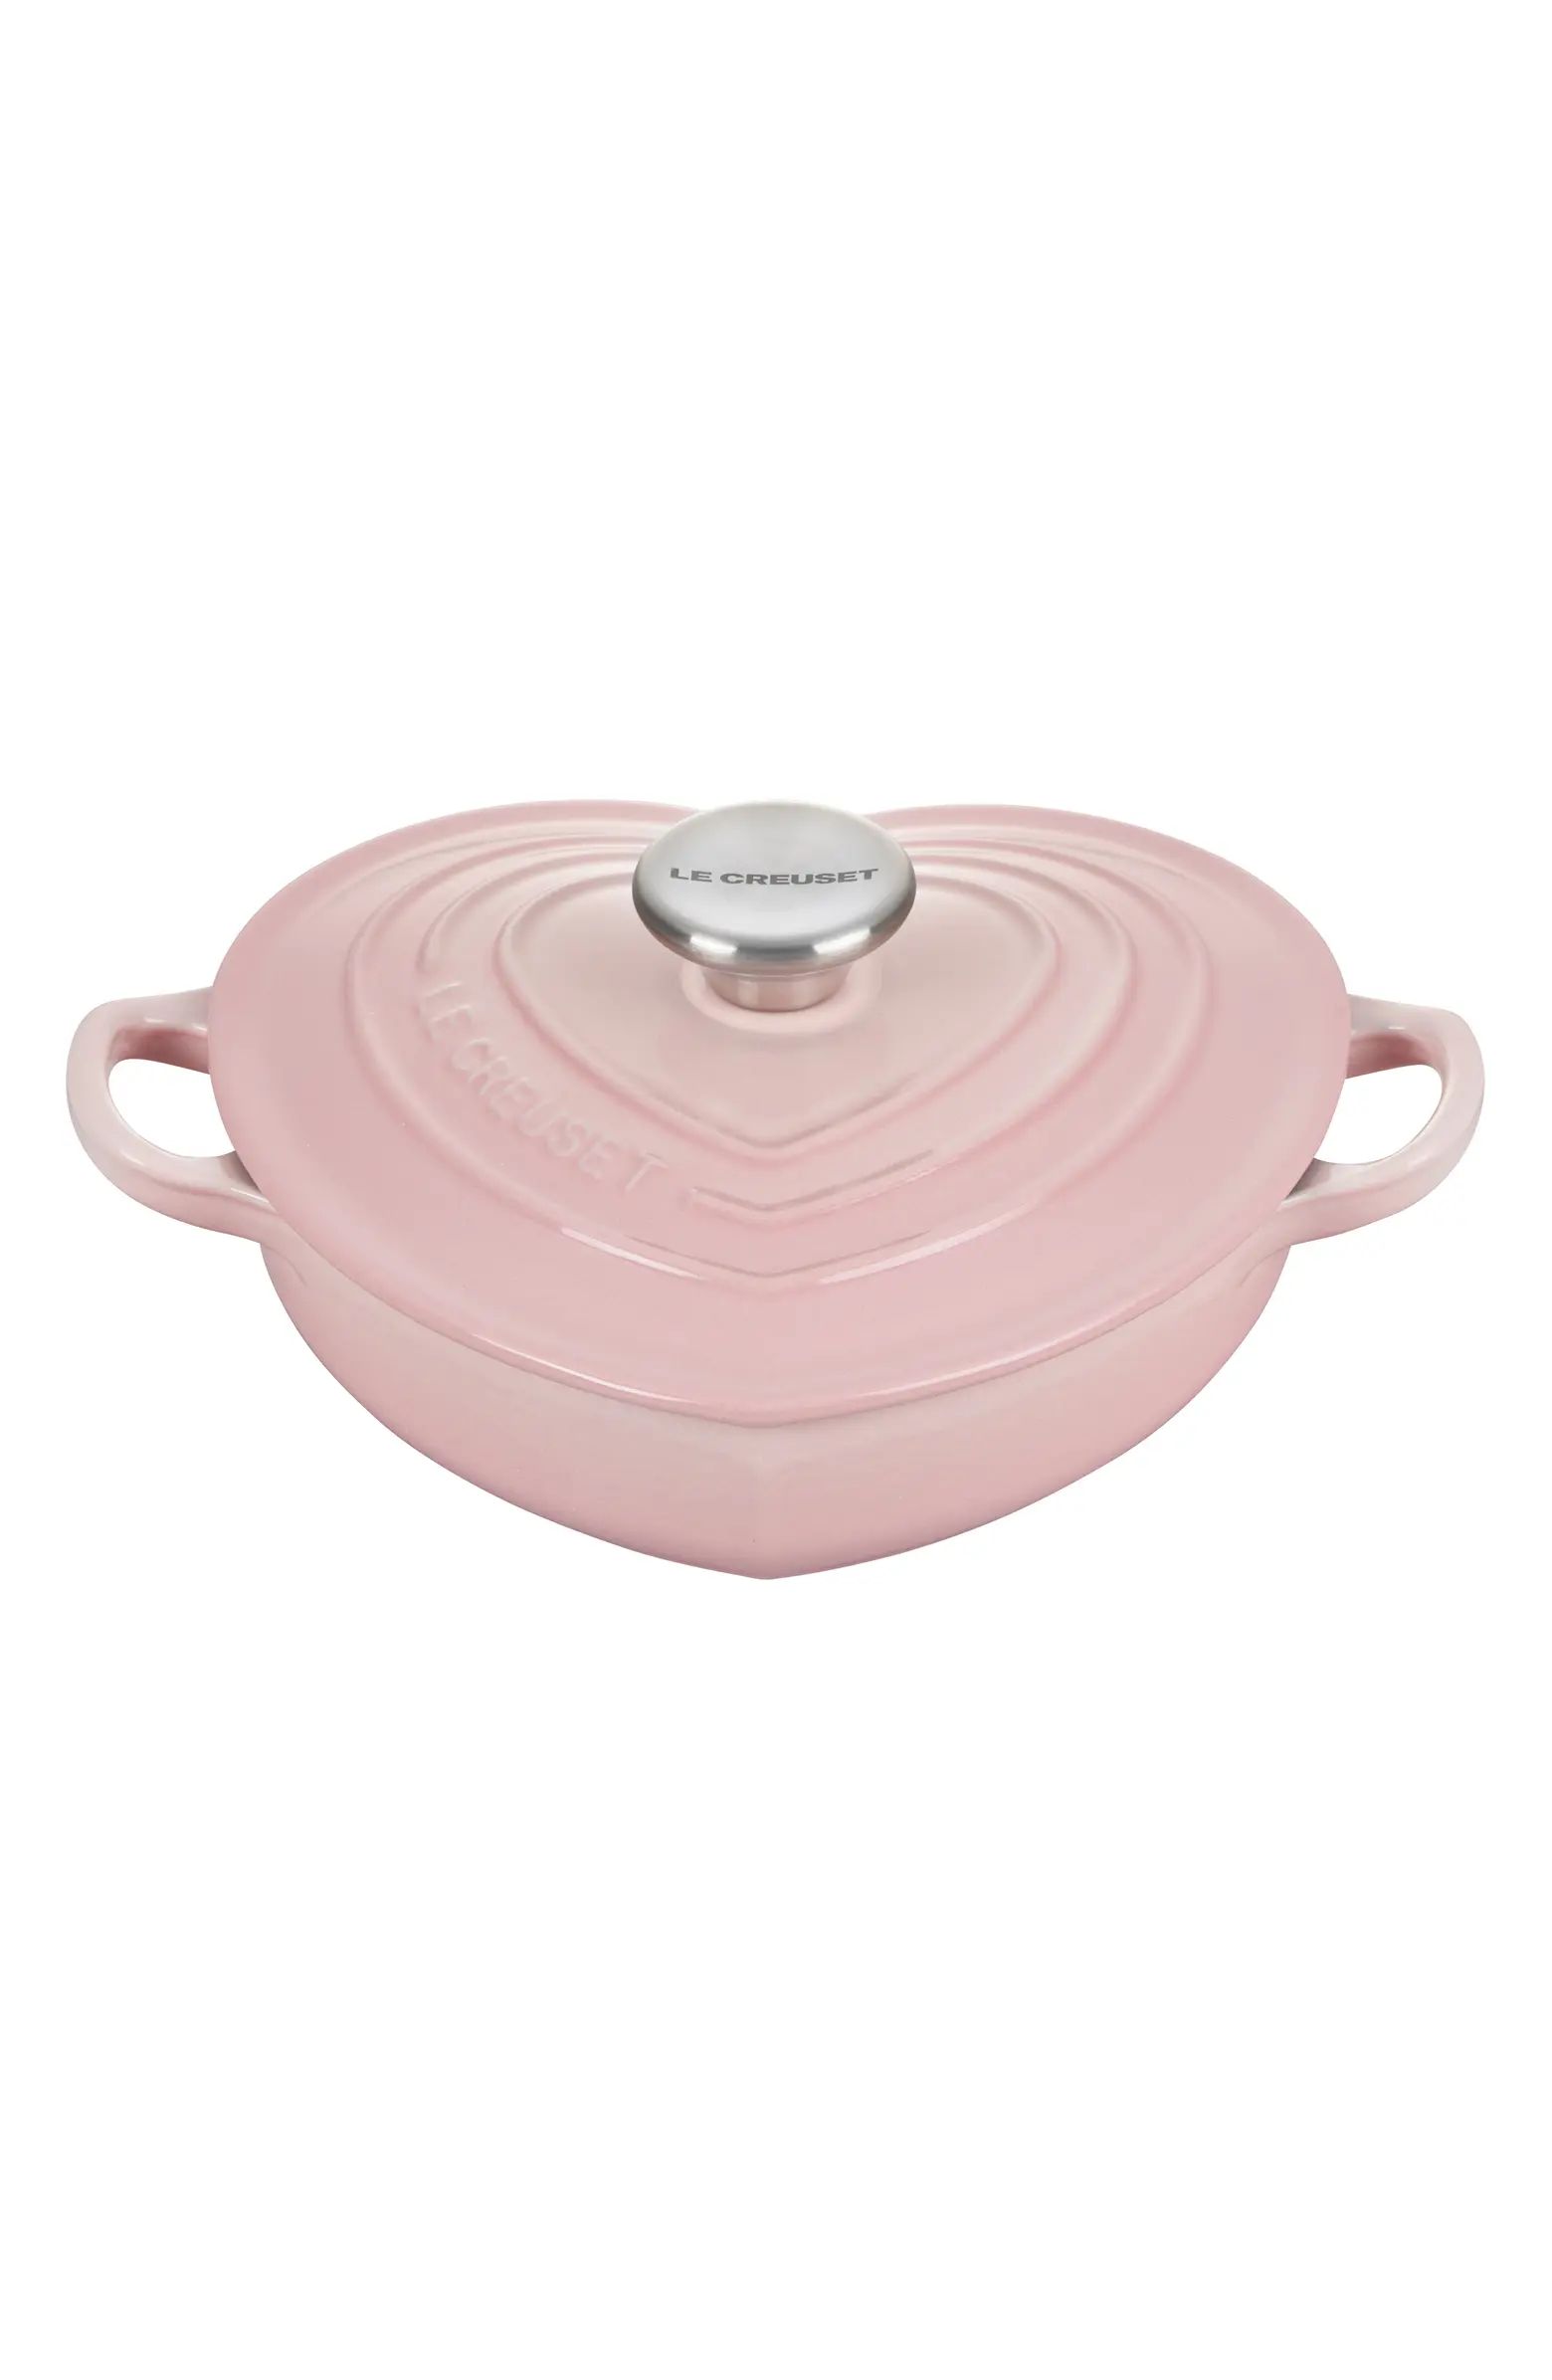 Signature Figural Heart Enameled Cast Iron Shallow Dutch Oven | Nordstrom